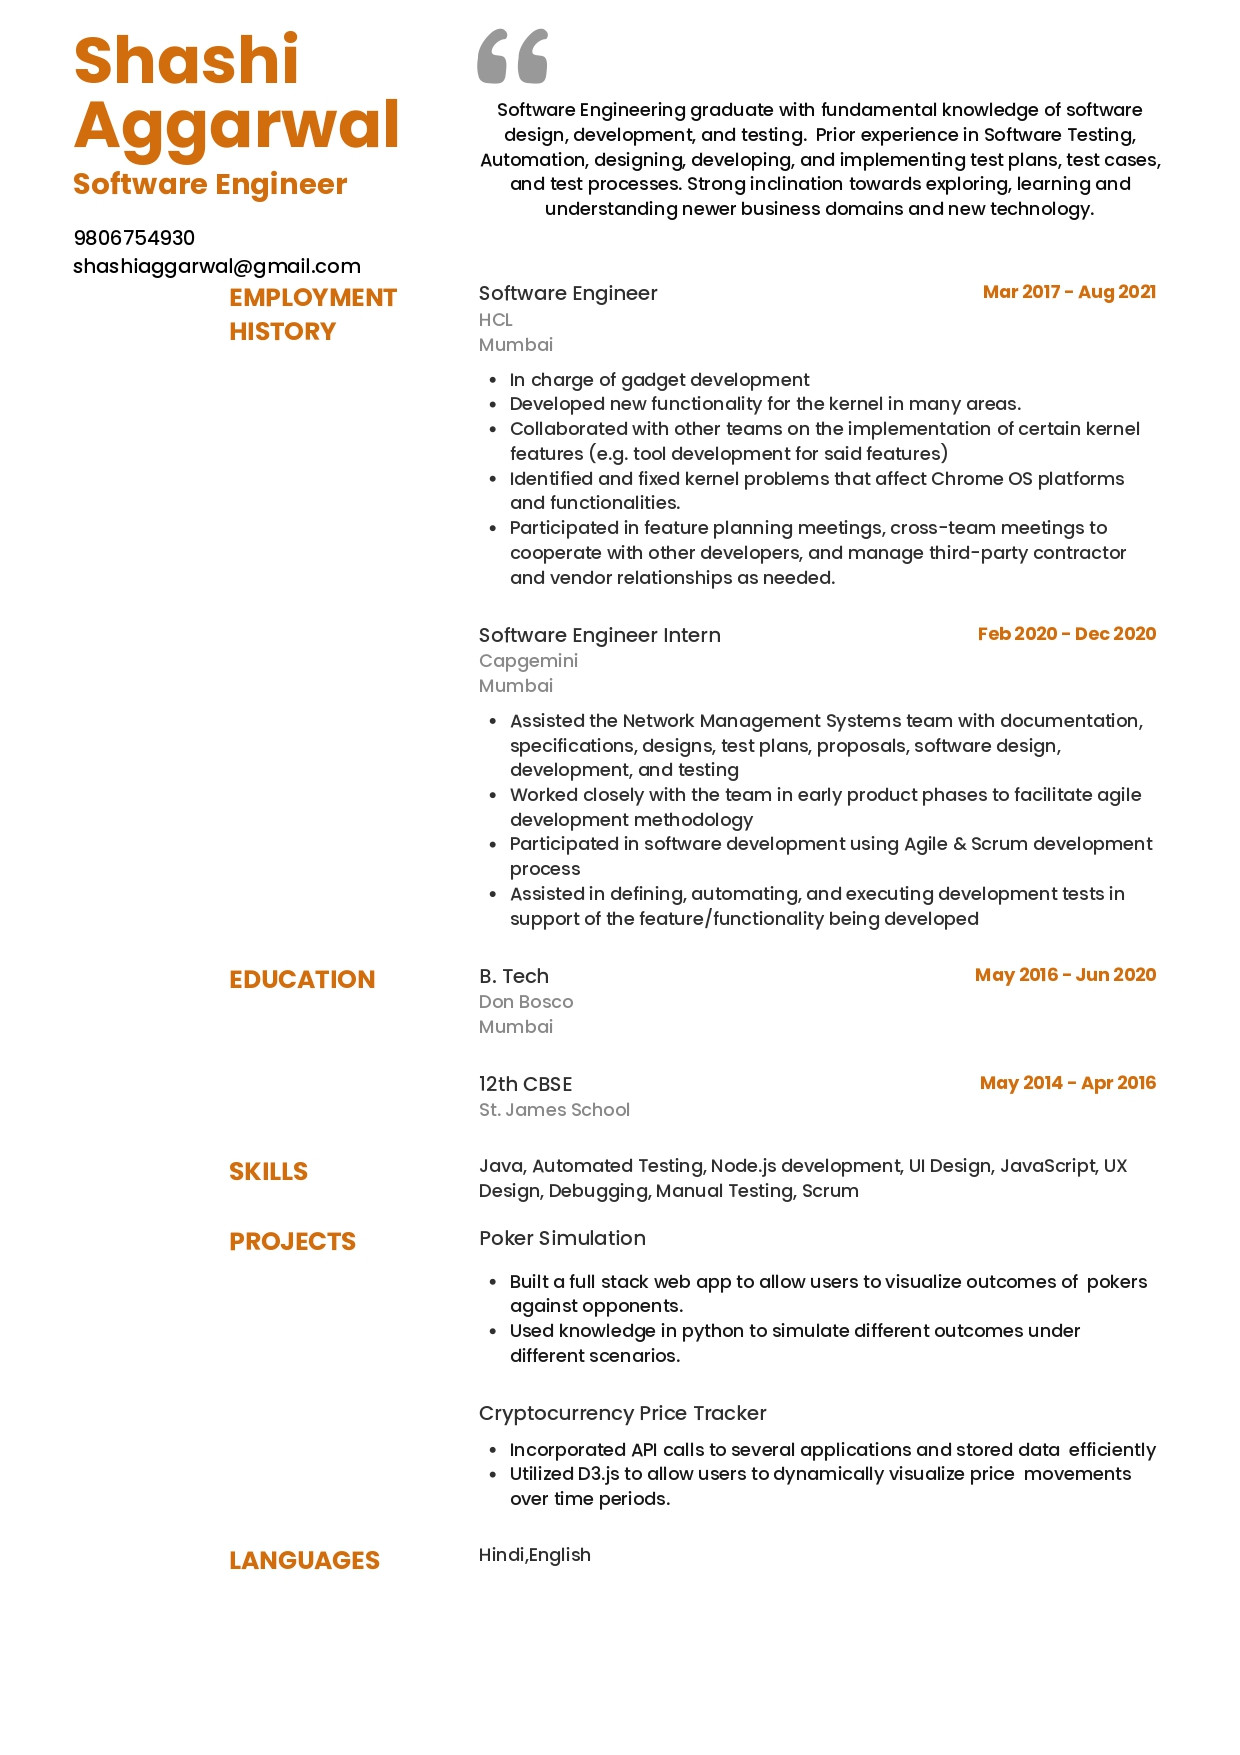 Product Development Engineer Resume Sample Automotive Sample Resume Of Automotive Engineer with Template & Writing Guide …